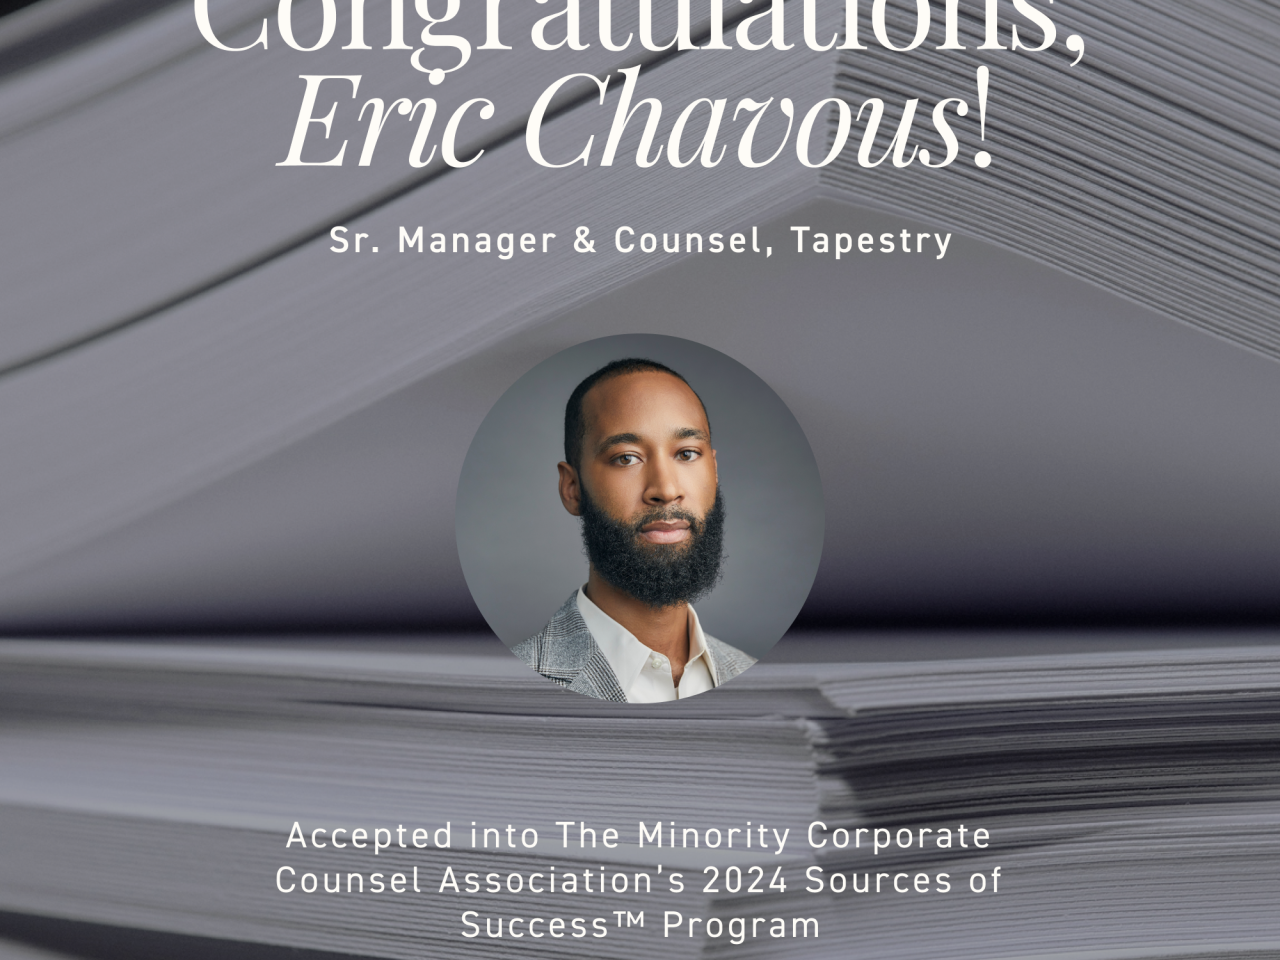 Photo of Eric Chavous, a Black man with a beard wearing a grey suit coat and white shirt, with the text Congratulations to Eric Chavous, Sr. Manager & Counsel, Tapestry, on his acceptance into The Minority Corporate Counsel Association’s 2024 Sources of Success™ Program 